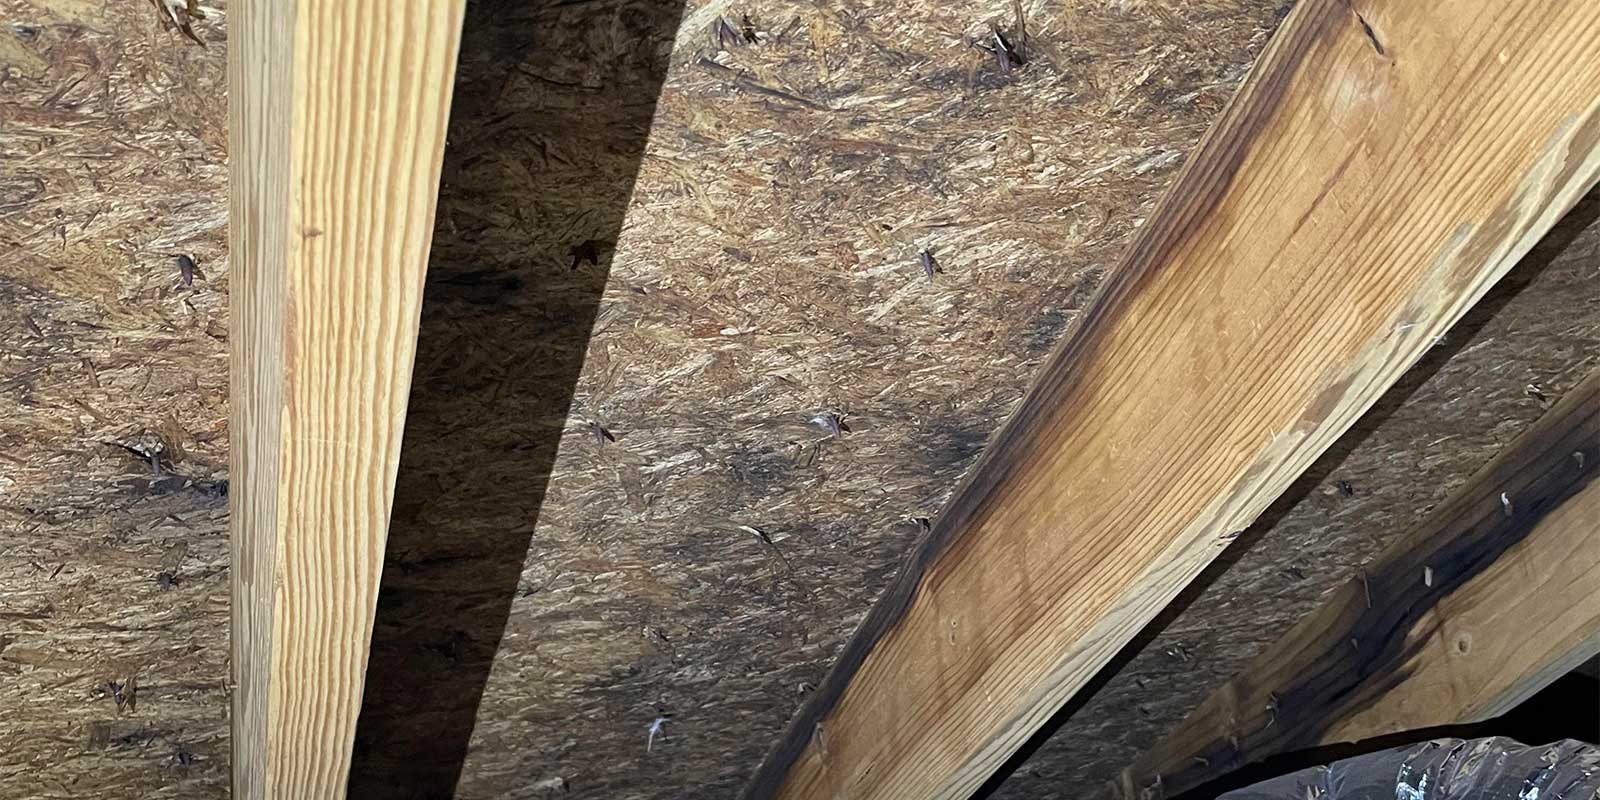 Black mold growing in attic on roof sheeting and joists